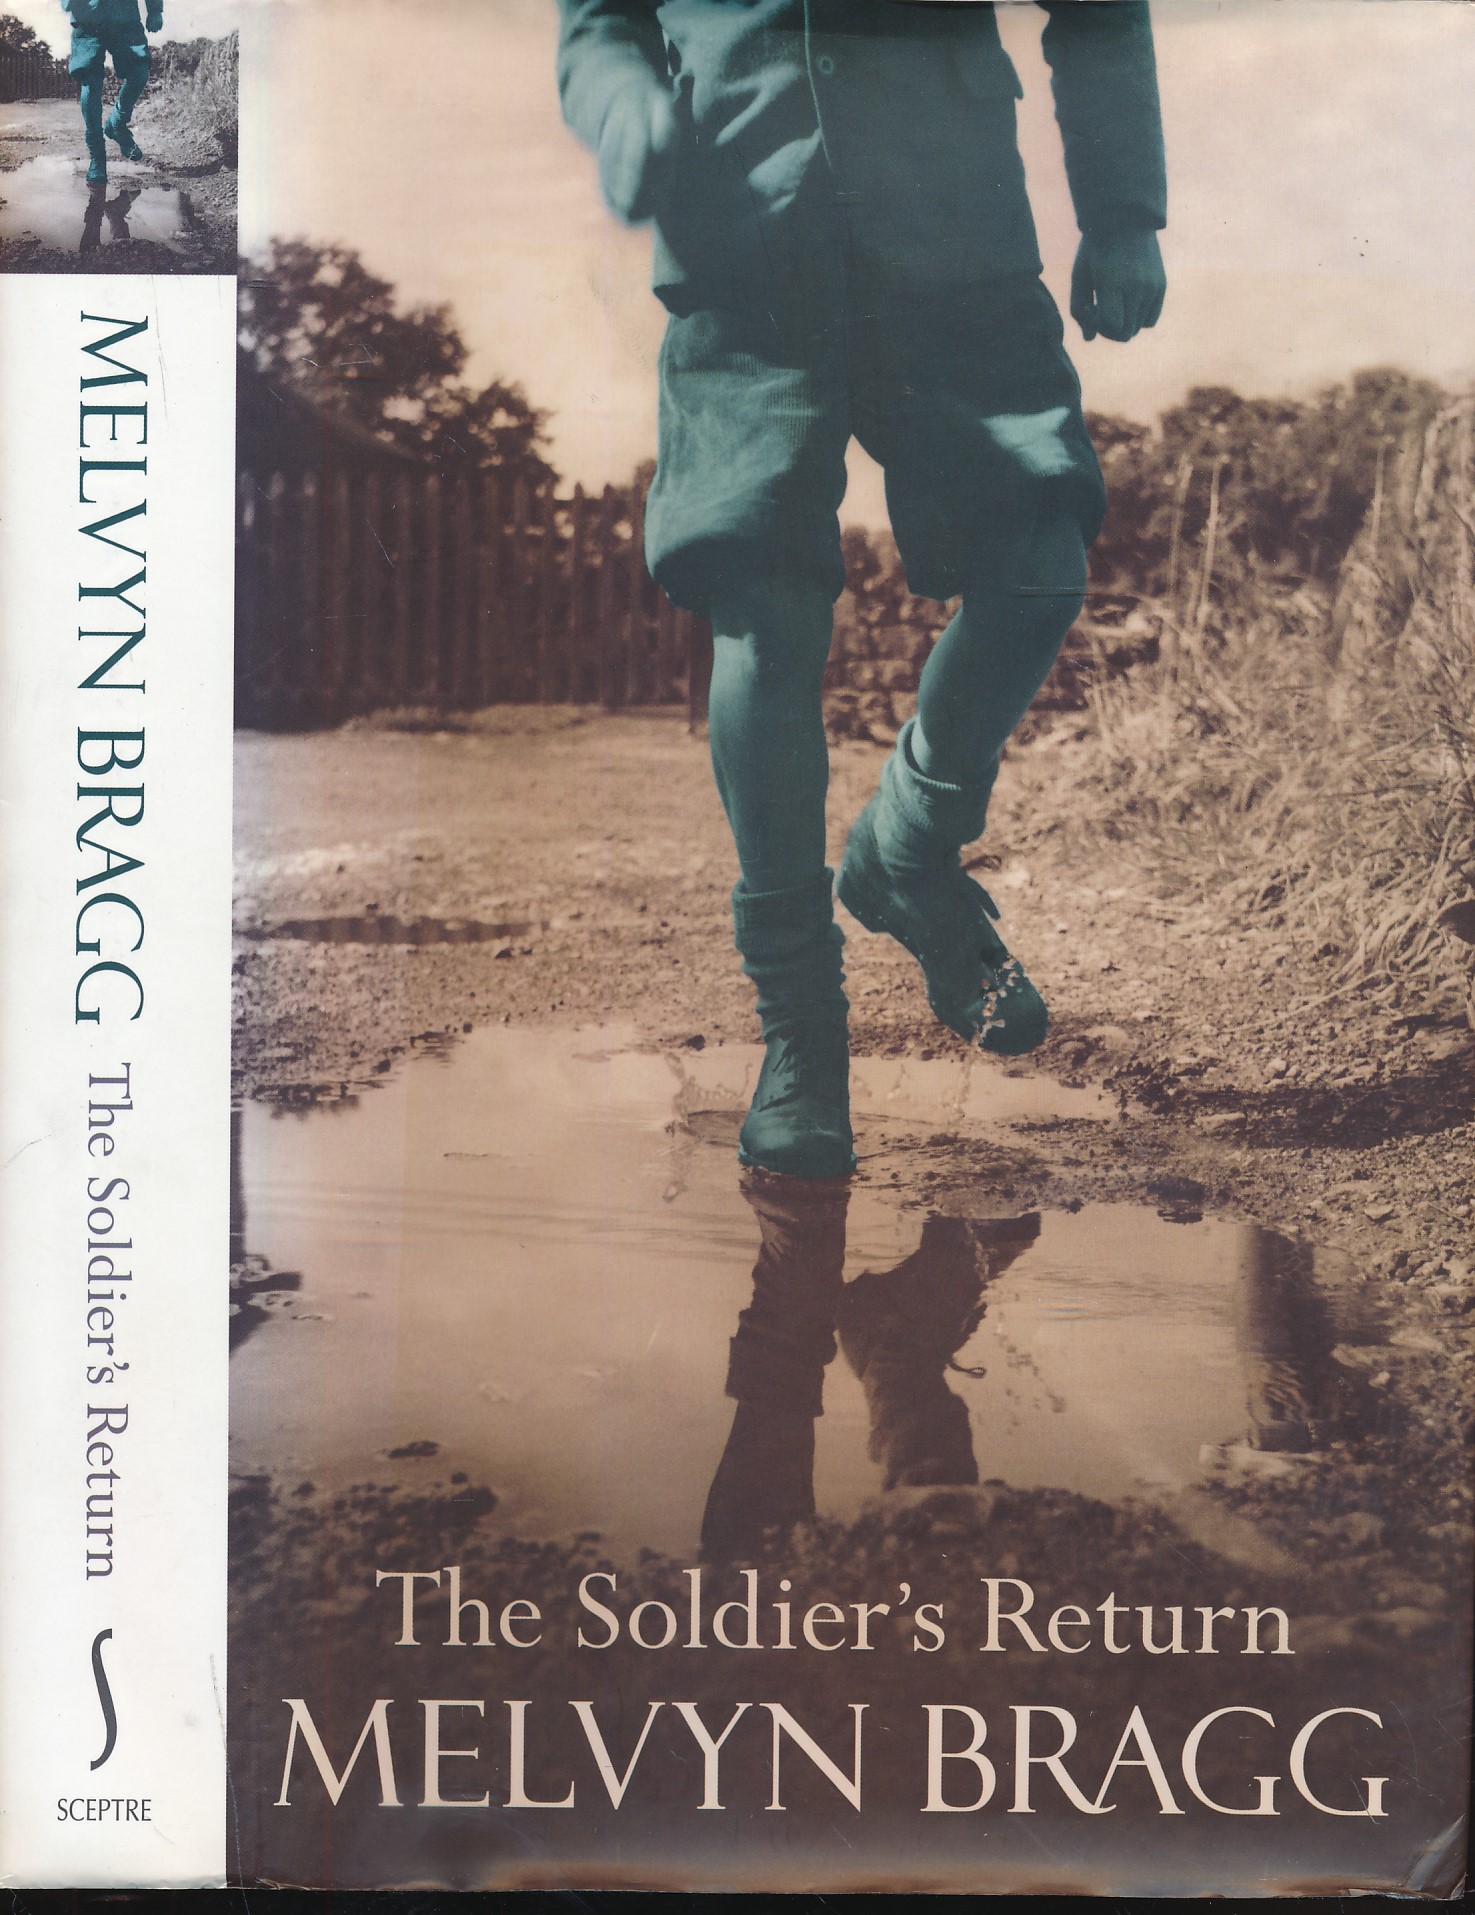 The Soldier's Return. Signed Copy.